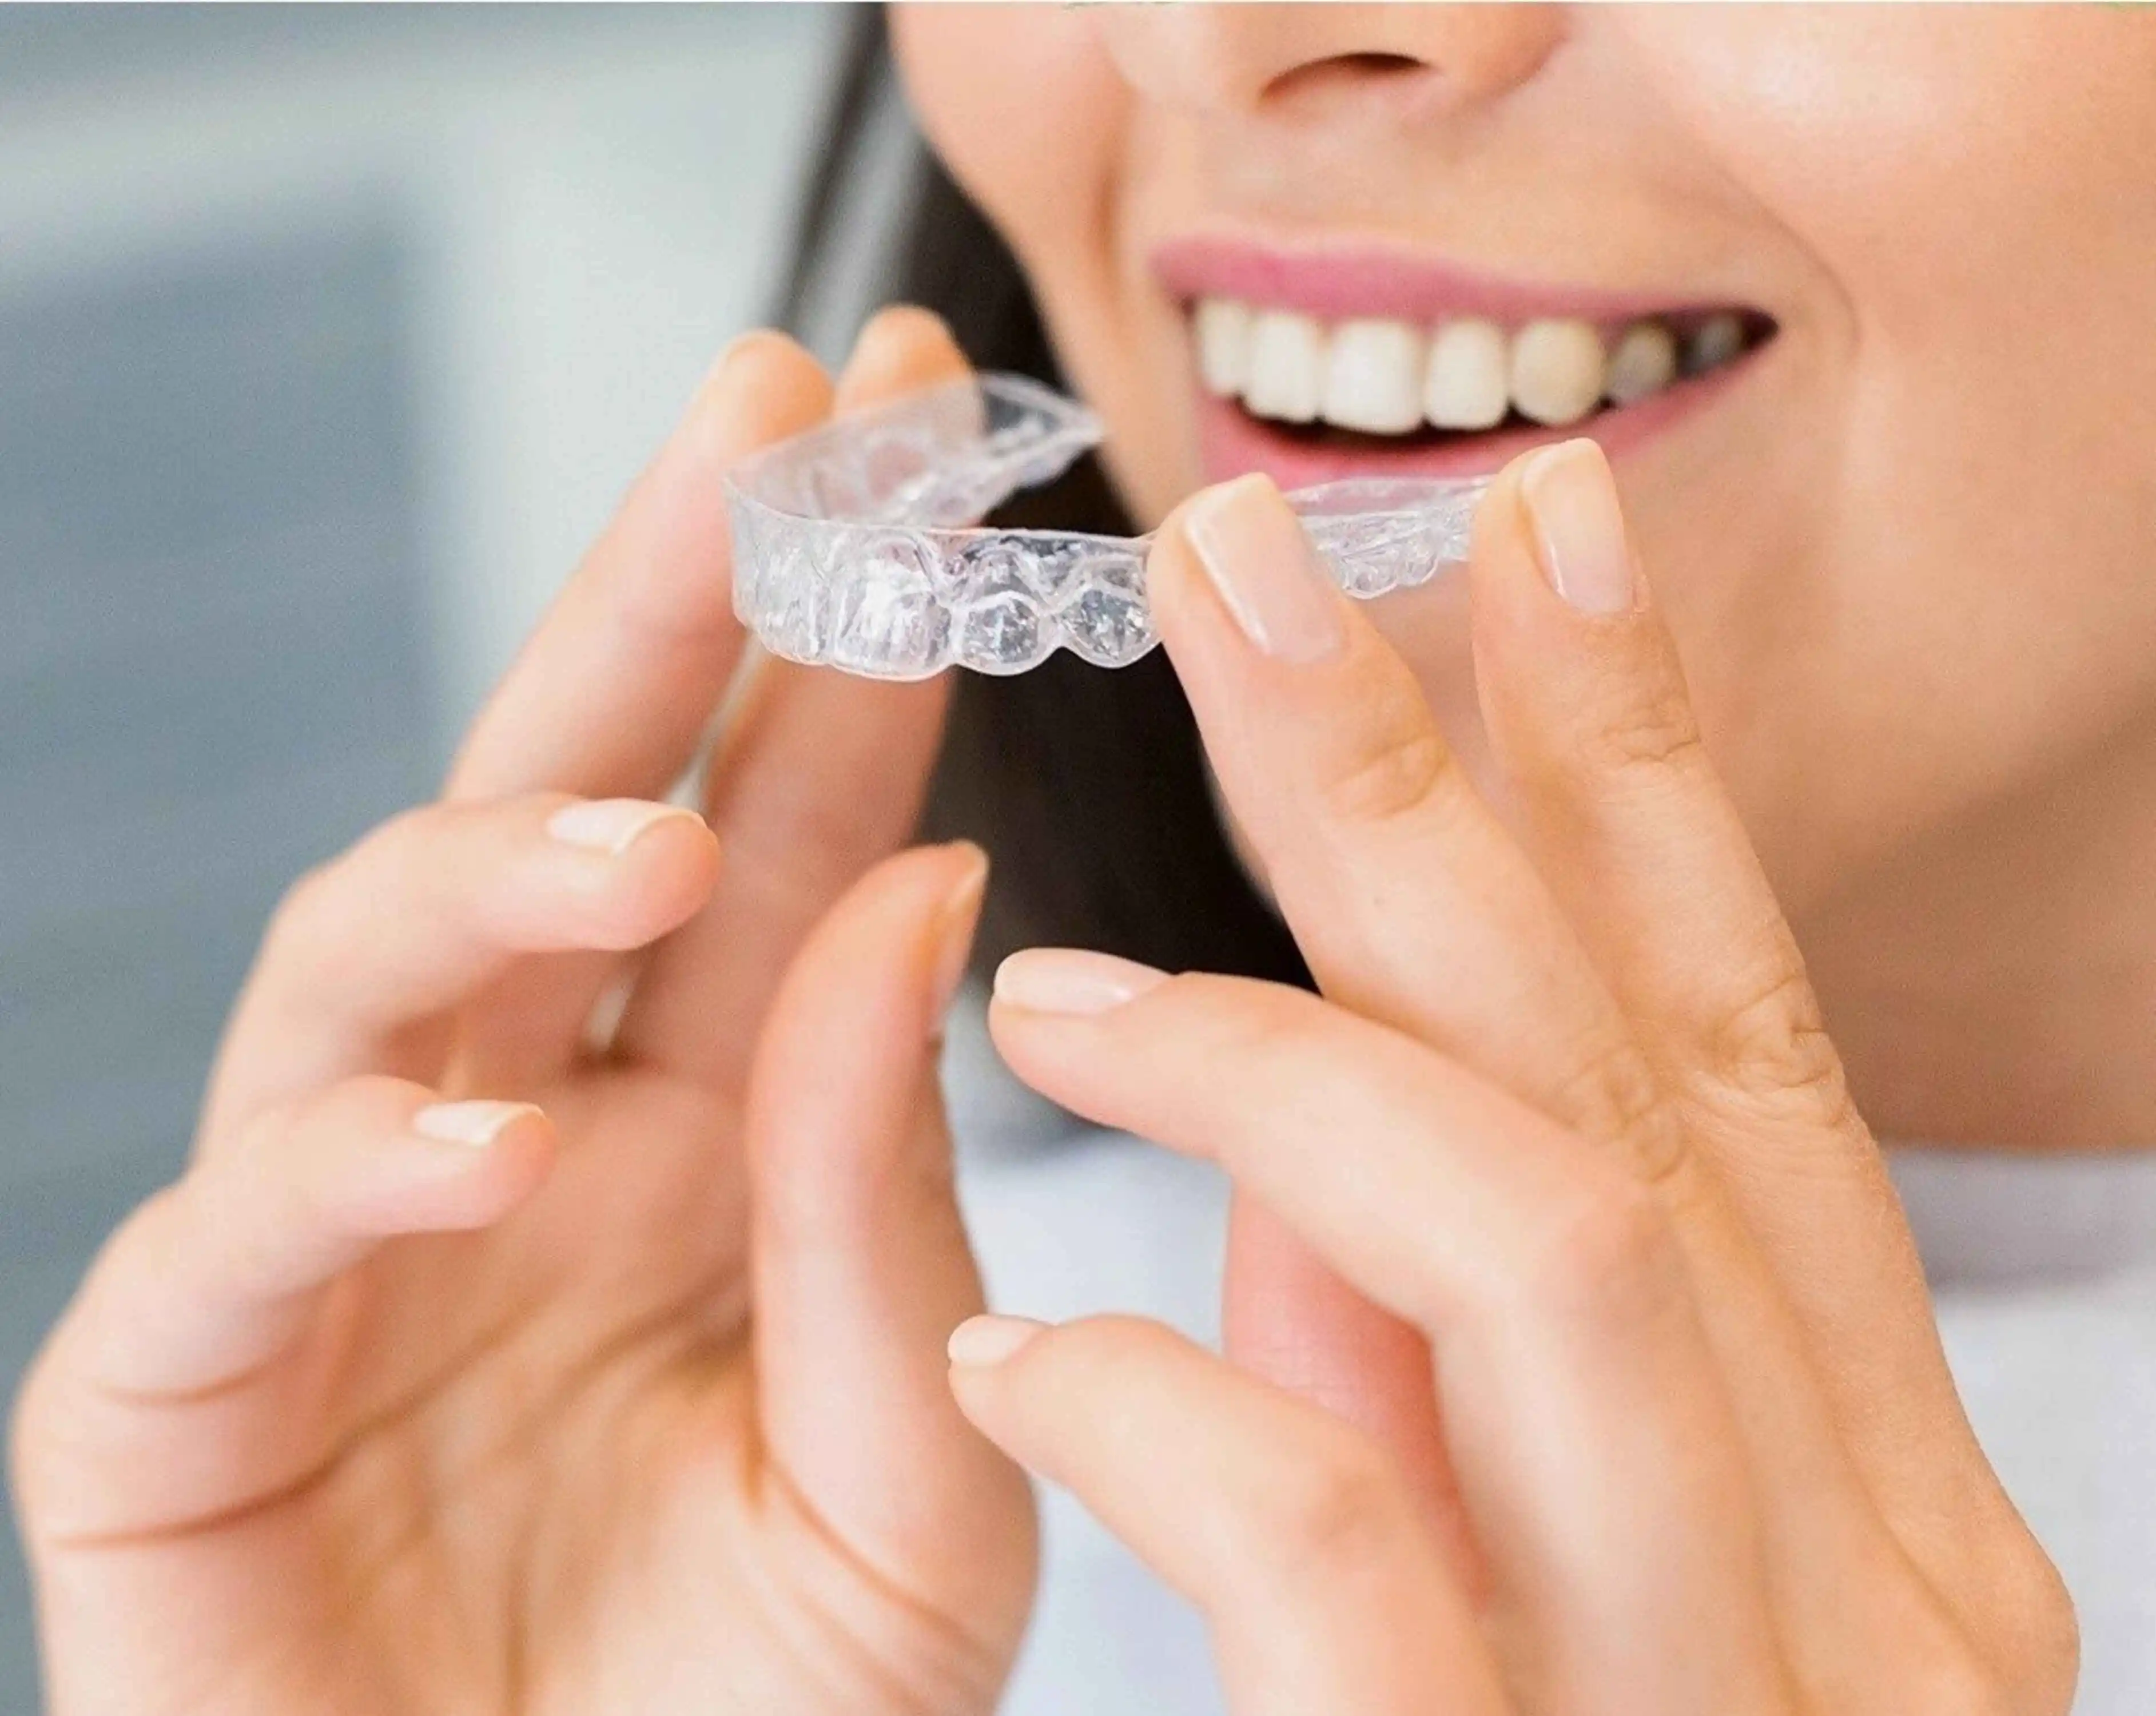 Can Reveal Teeth Aligners Fix Overbites